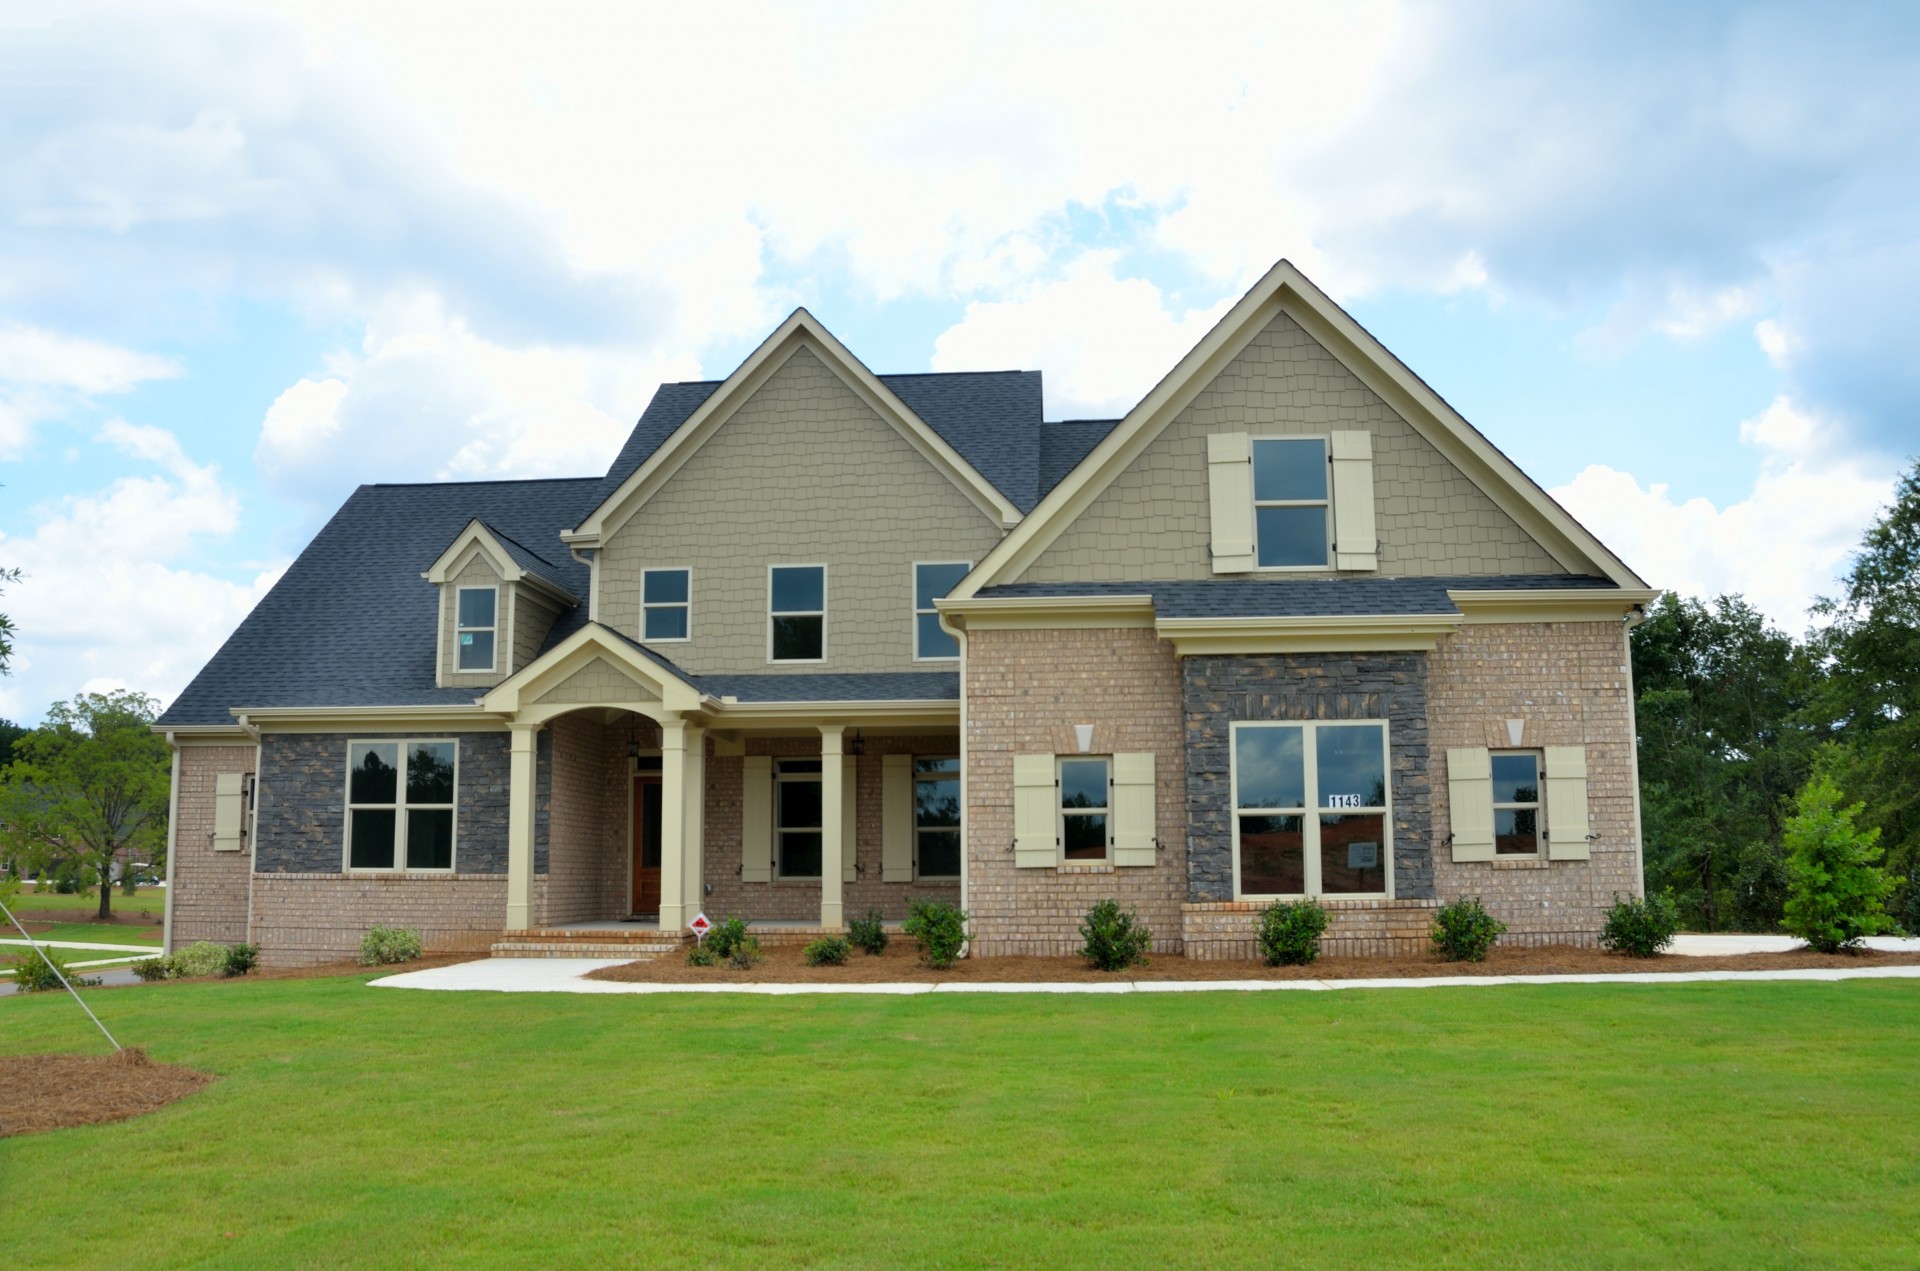 New Home Construction Free Stock Photo - Public Domain Pictures